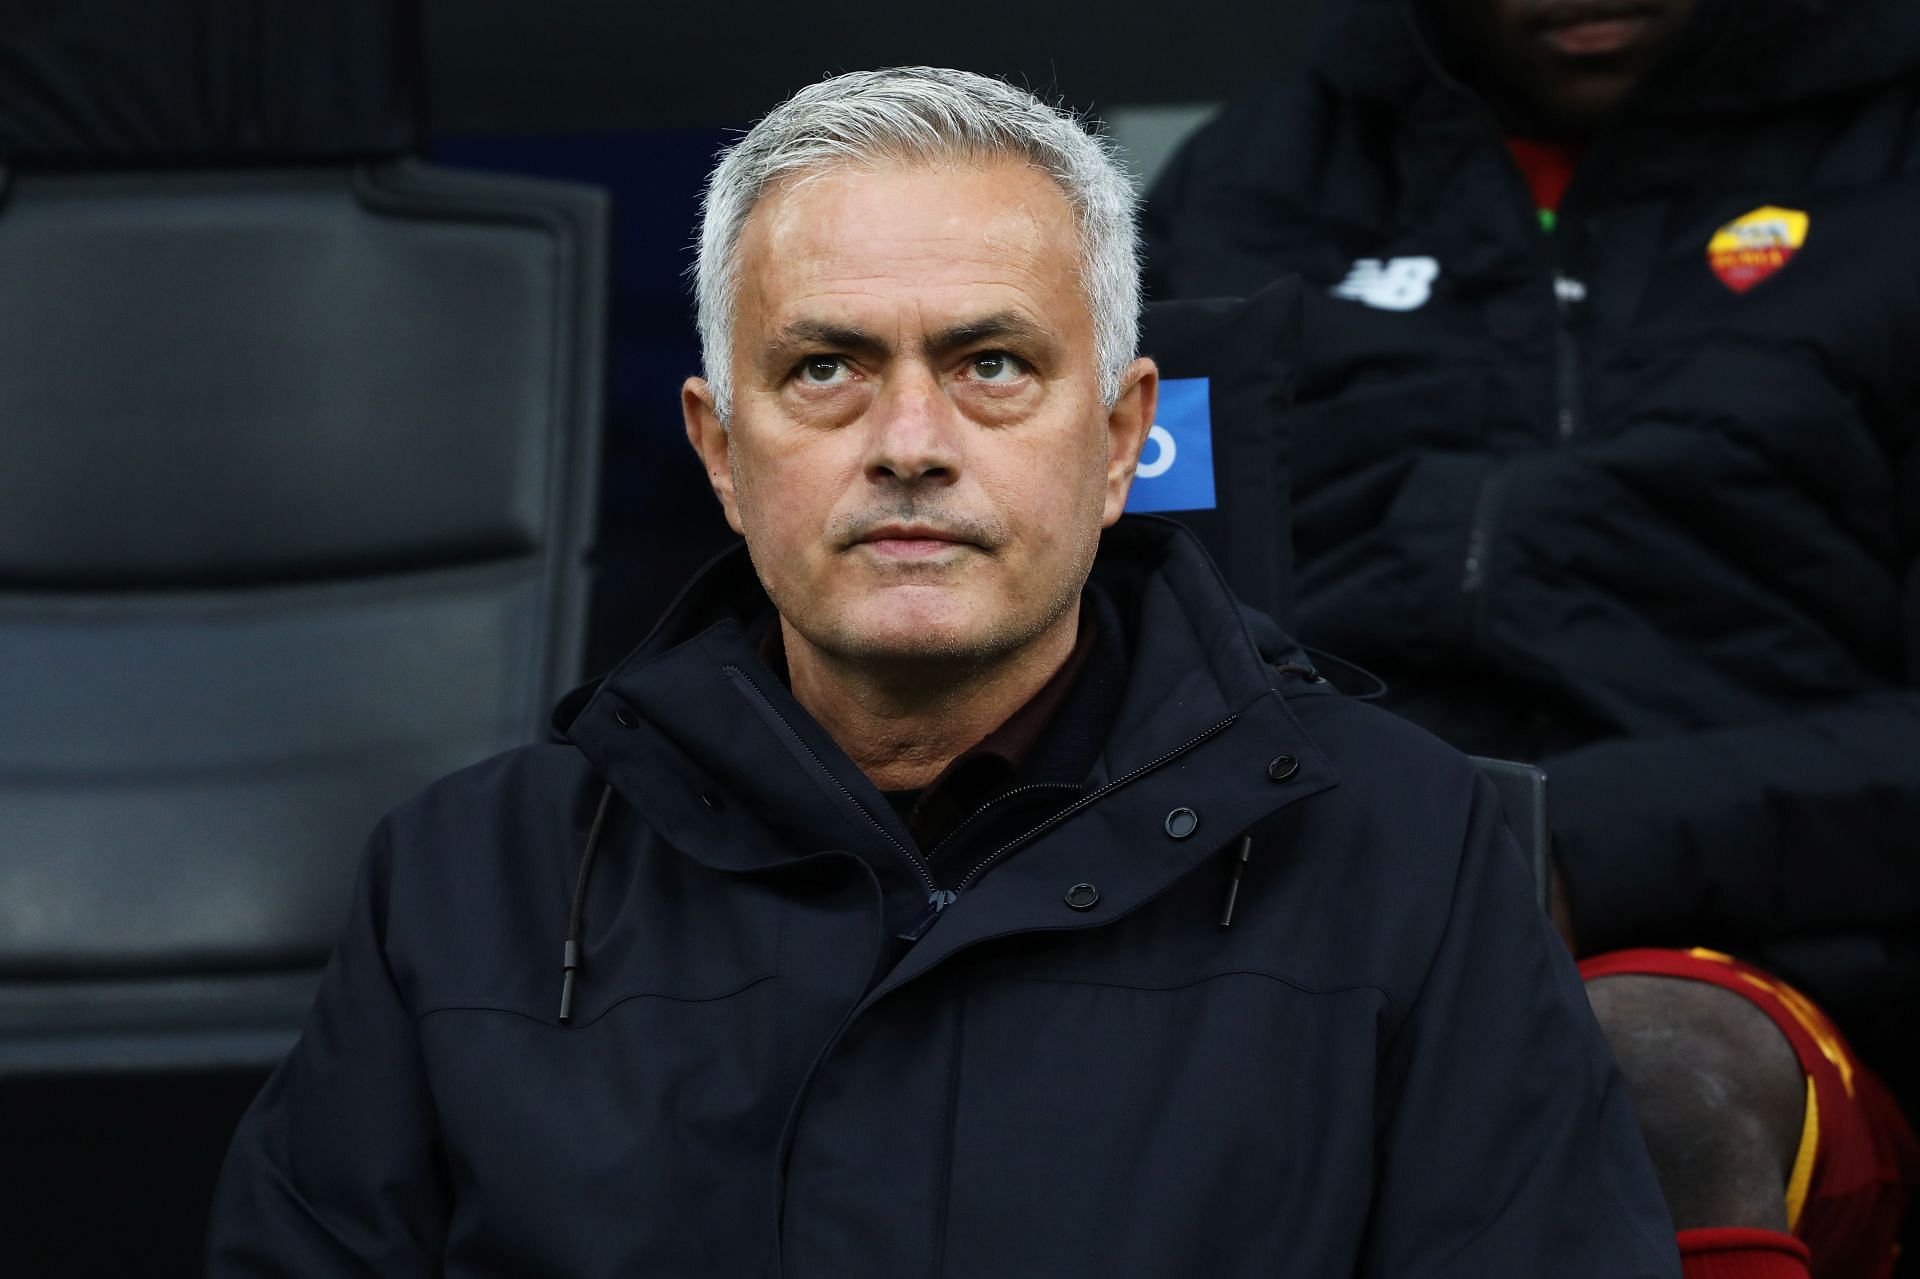 Jose Mourinho is ready to rule in Europe once again